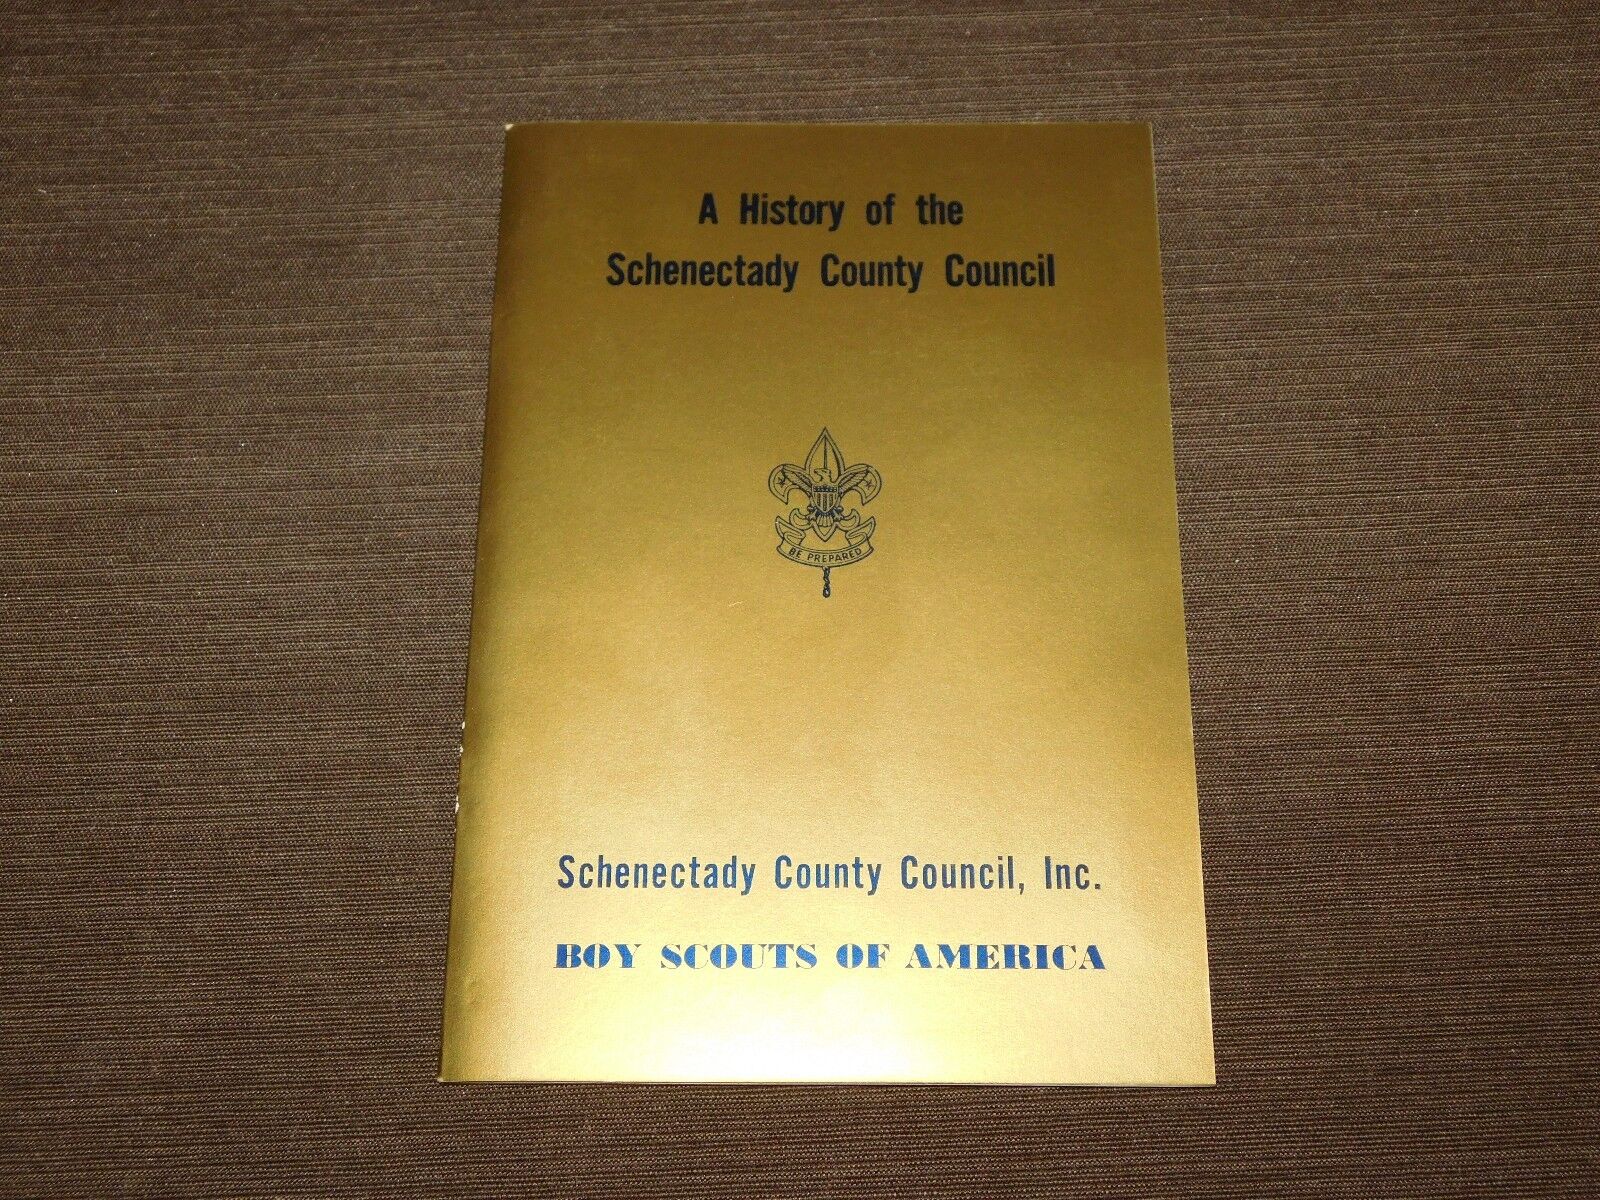 VINTAGE BSA BOY SCOUTS OF AMERICA 1965 HISTORY  SCHENECTADY COUNTY COUNCIL BOOK